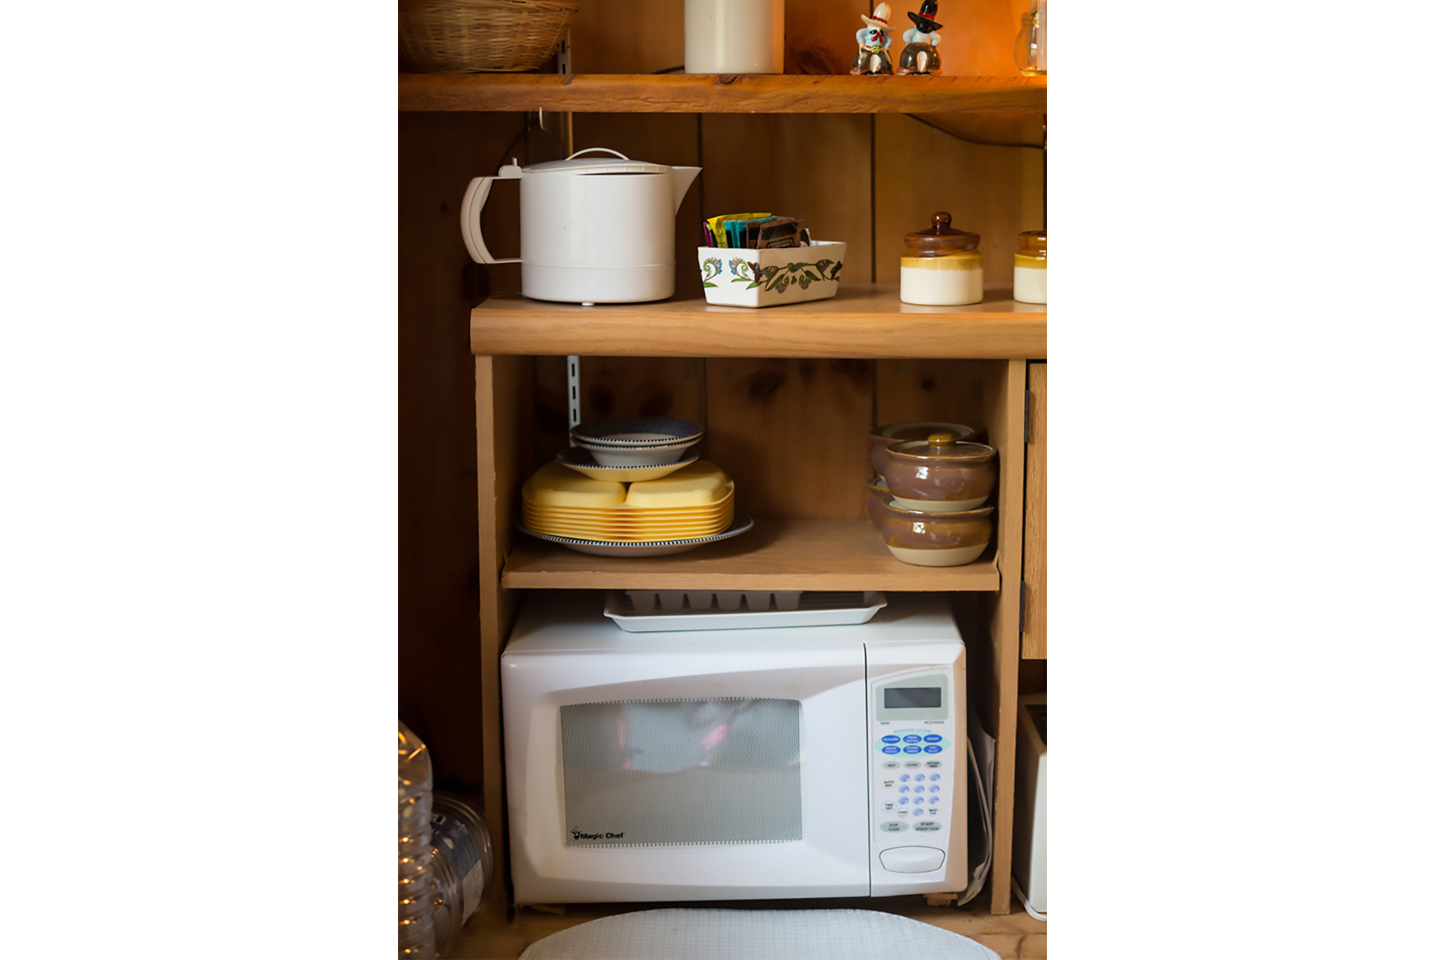 Ammenities include a microwave and full set of dishes & silverware